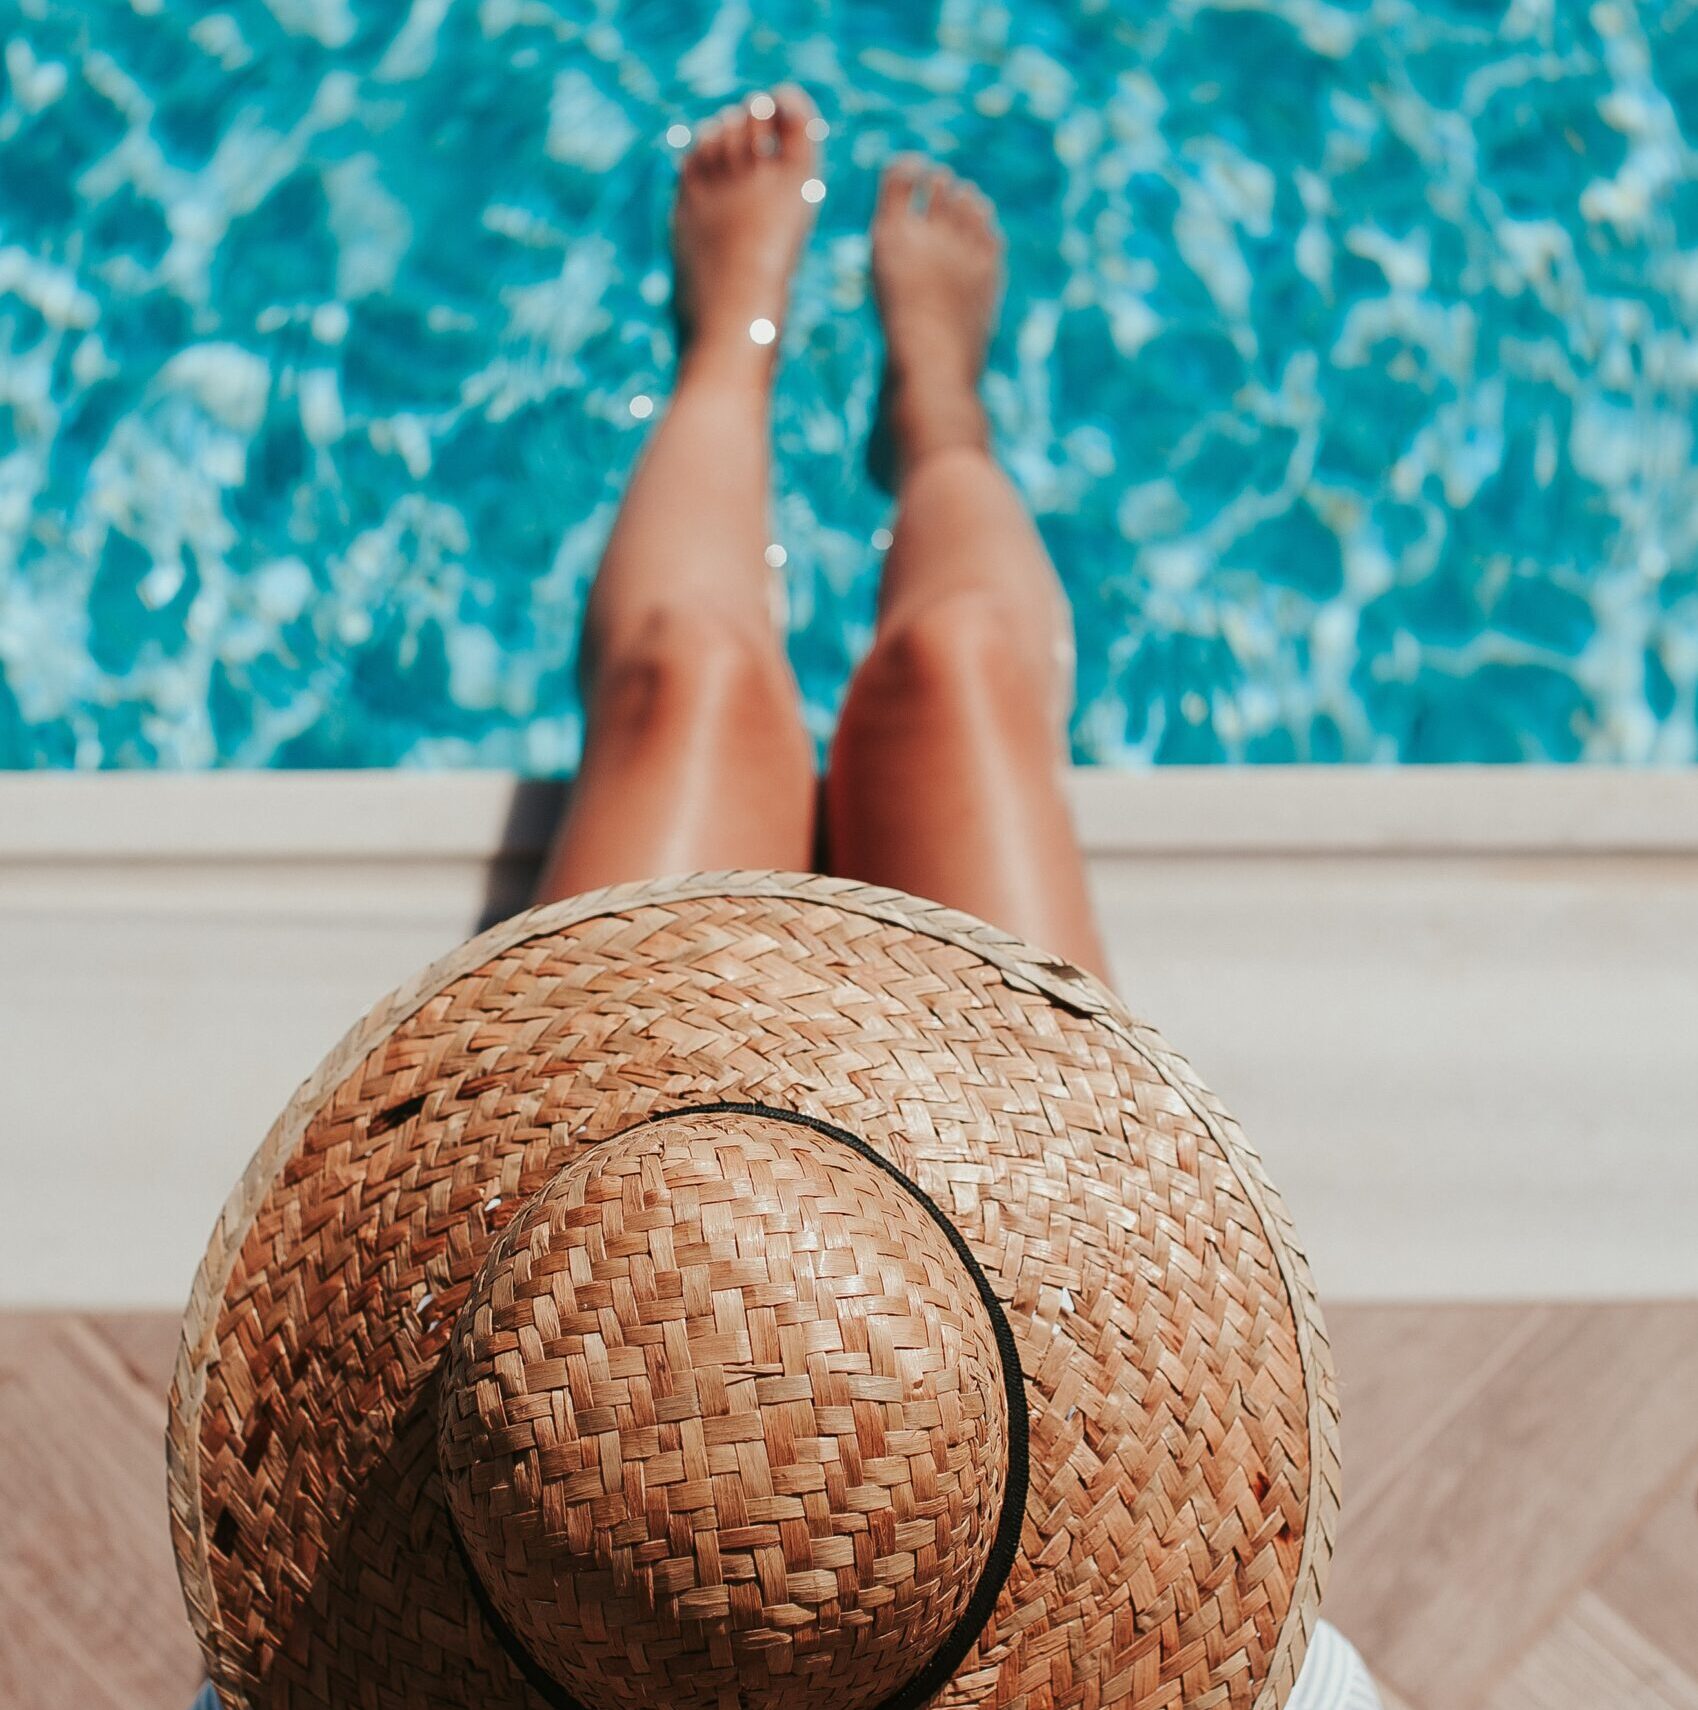 Woman wearing a straw hat sitting at the edge of a pool.